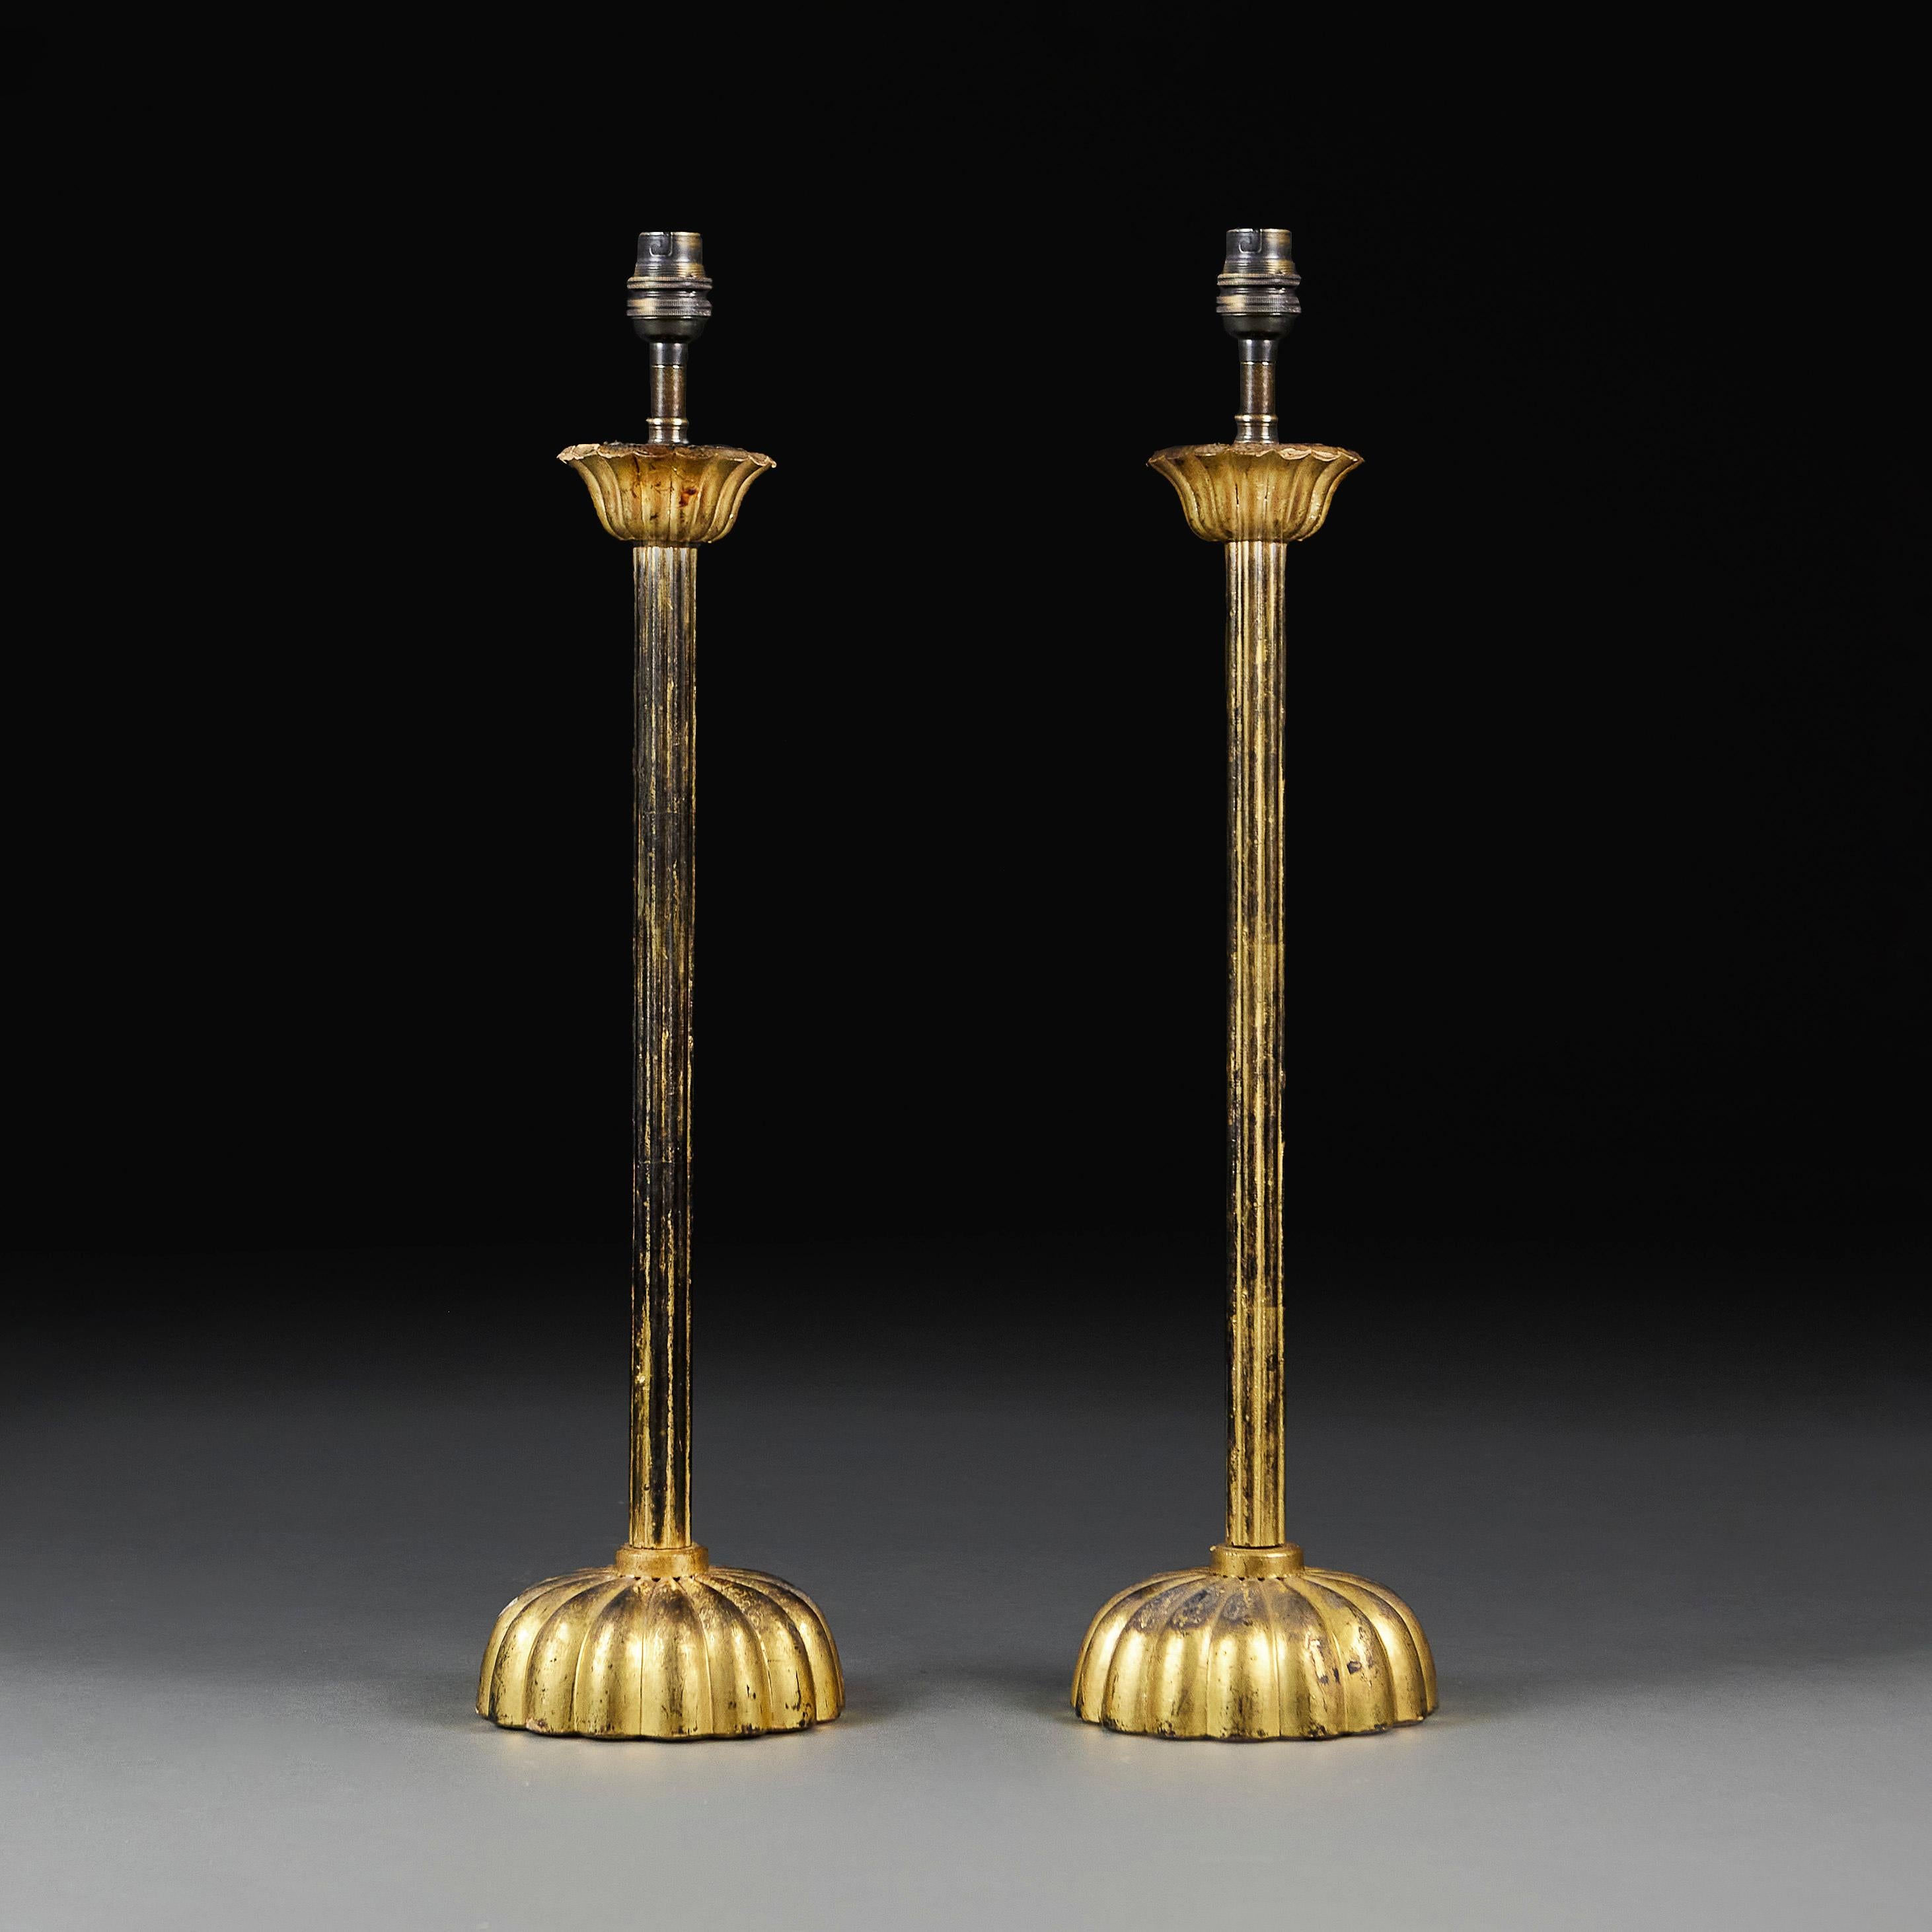 A Large Pair Of 19th Century Japanese Candlestick Lamps In Good Condition For Sale In London, GB